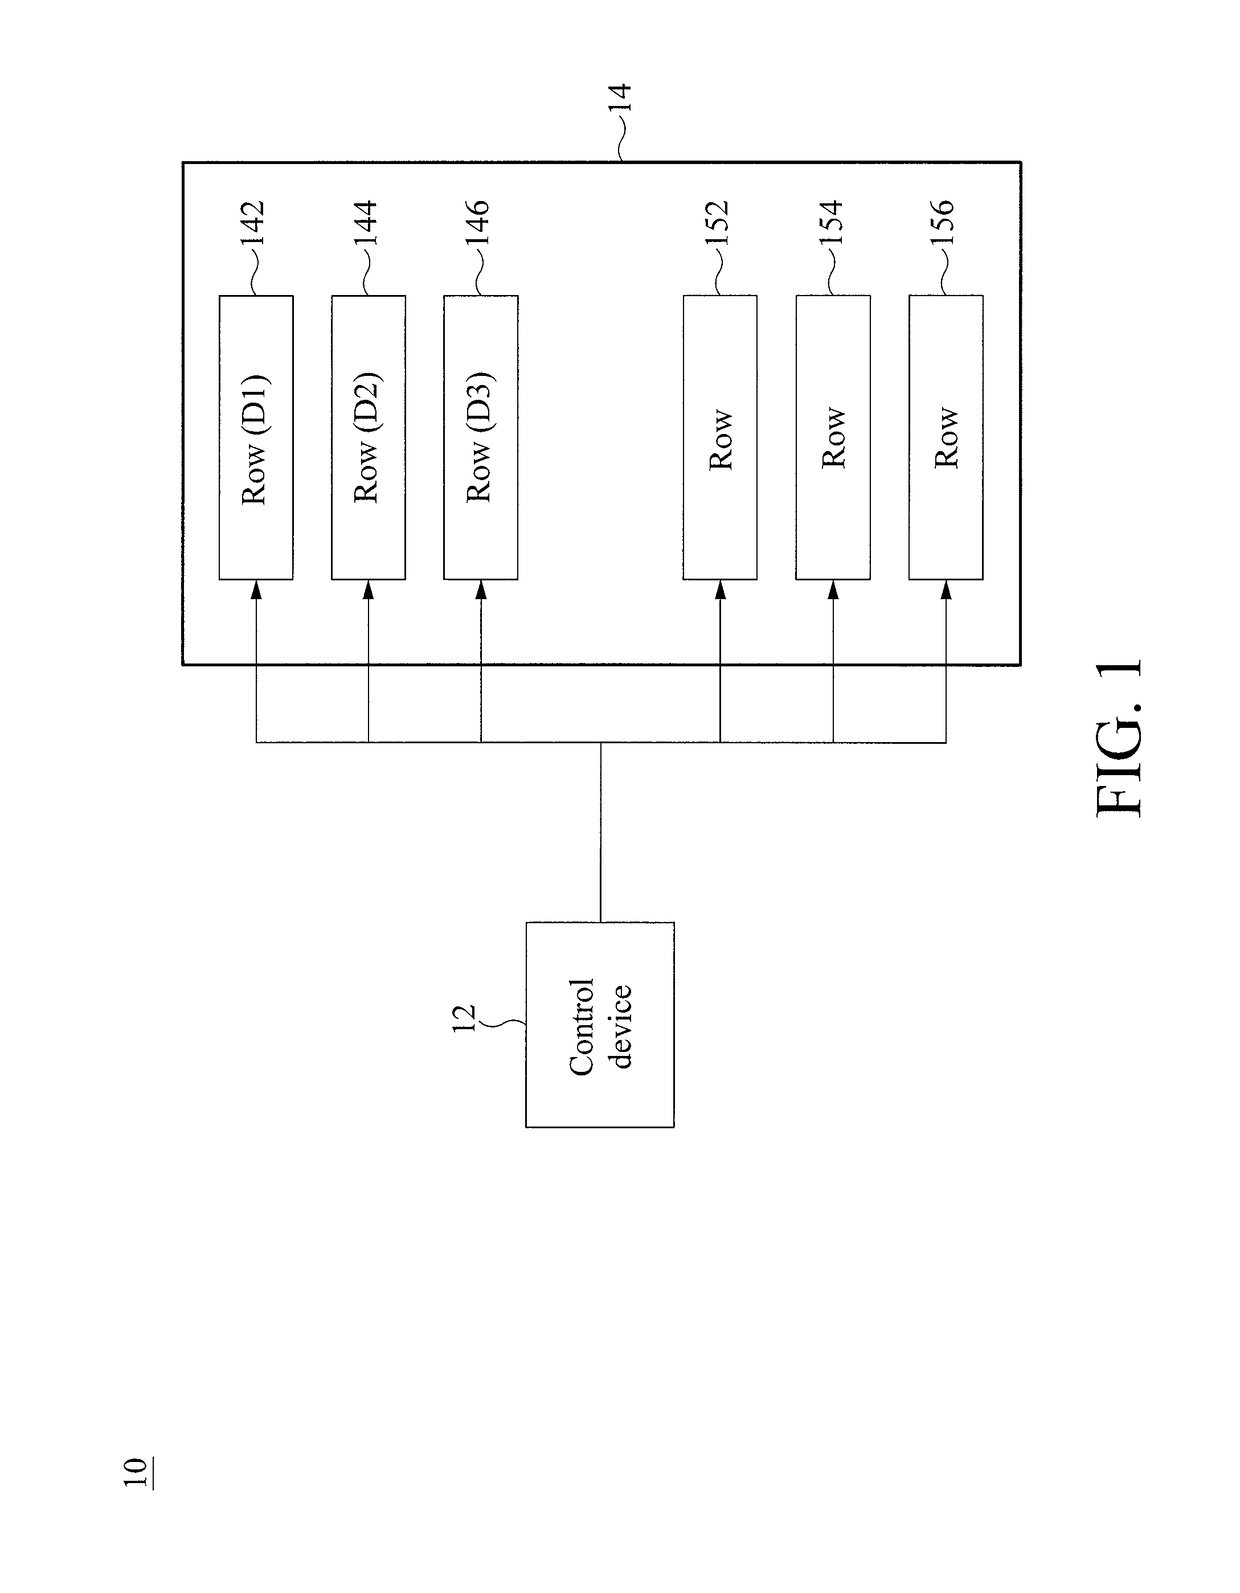 Dram and method for accessing a dram